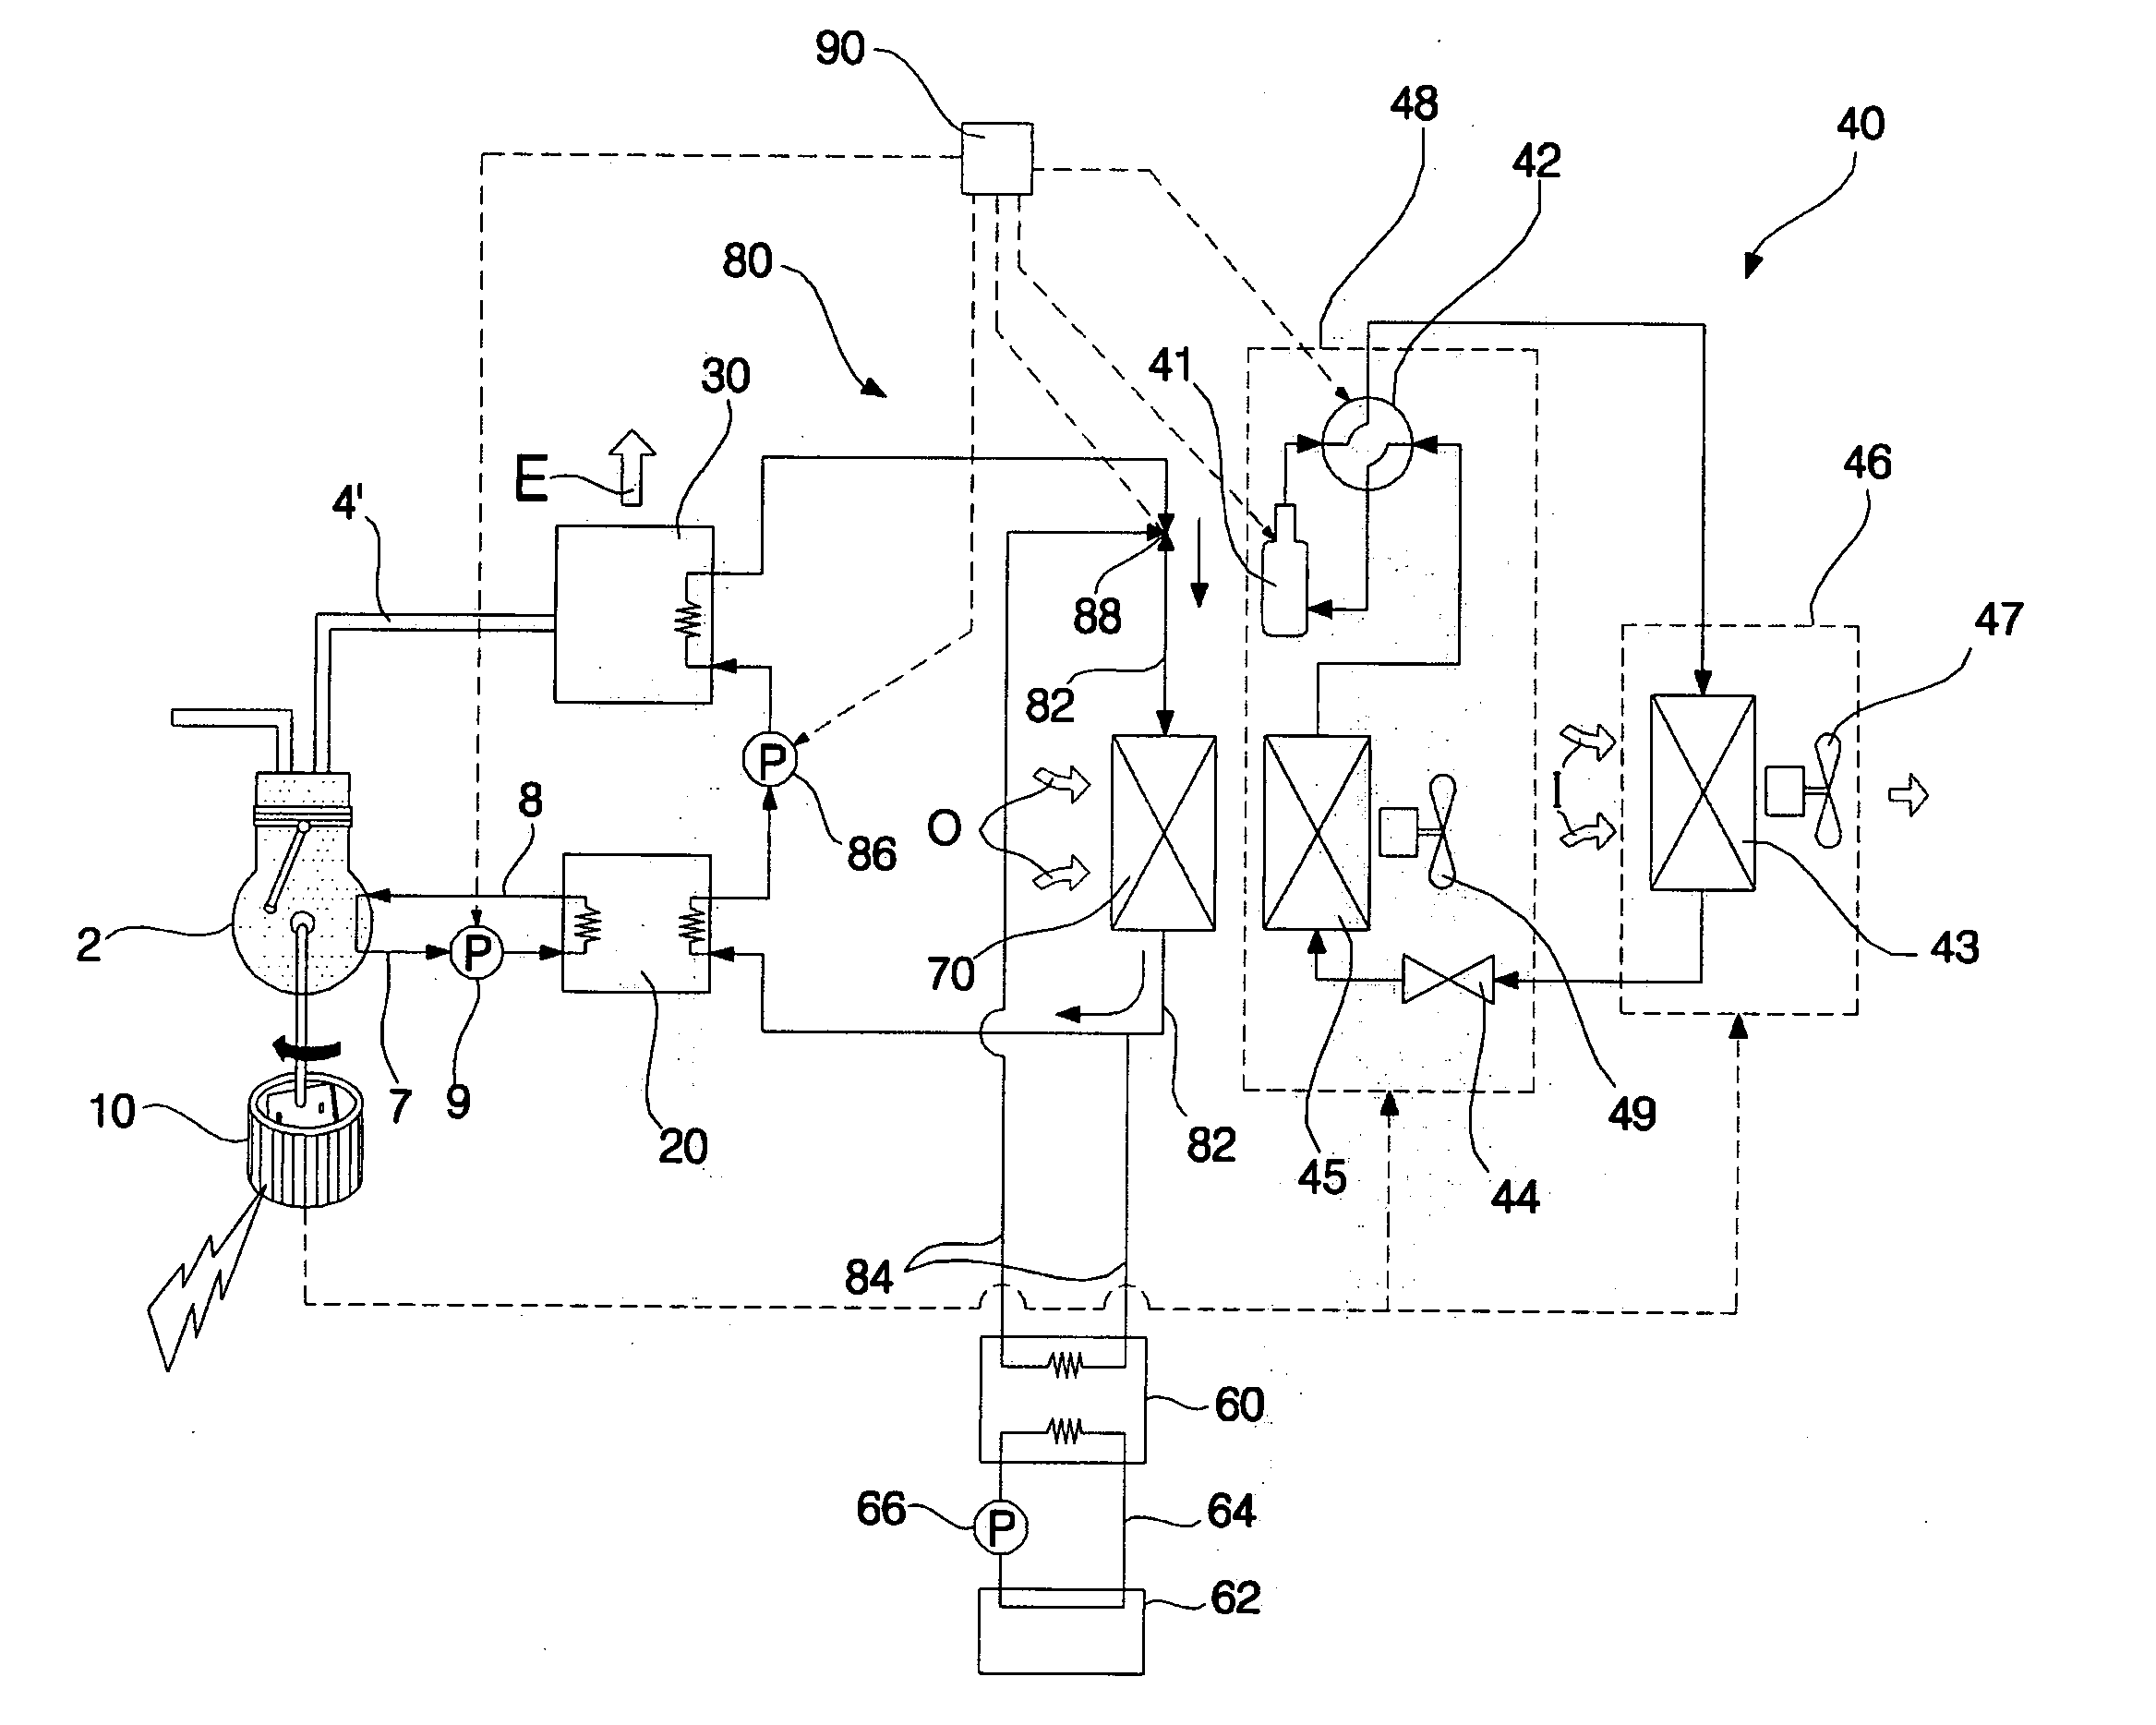 Electricity generating and air conditioning system with water heater